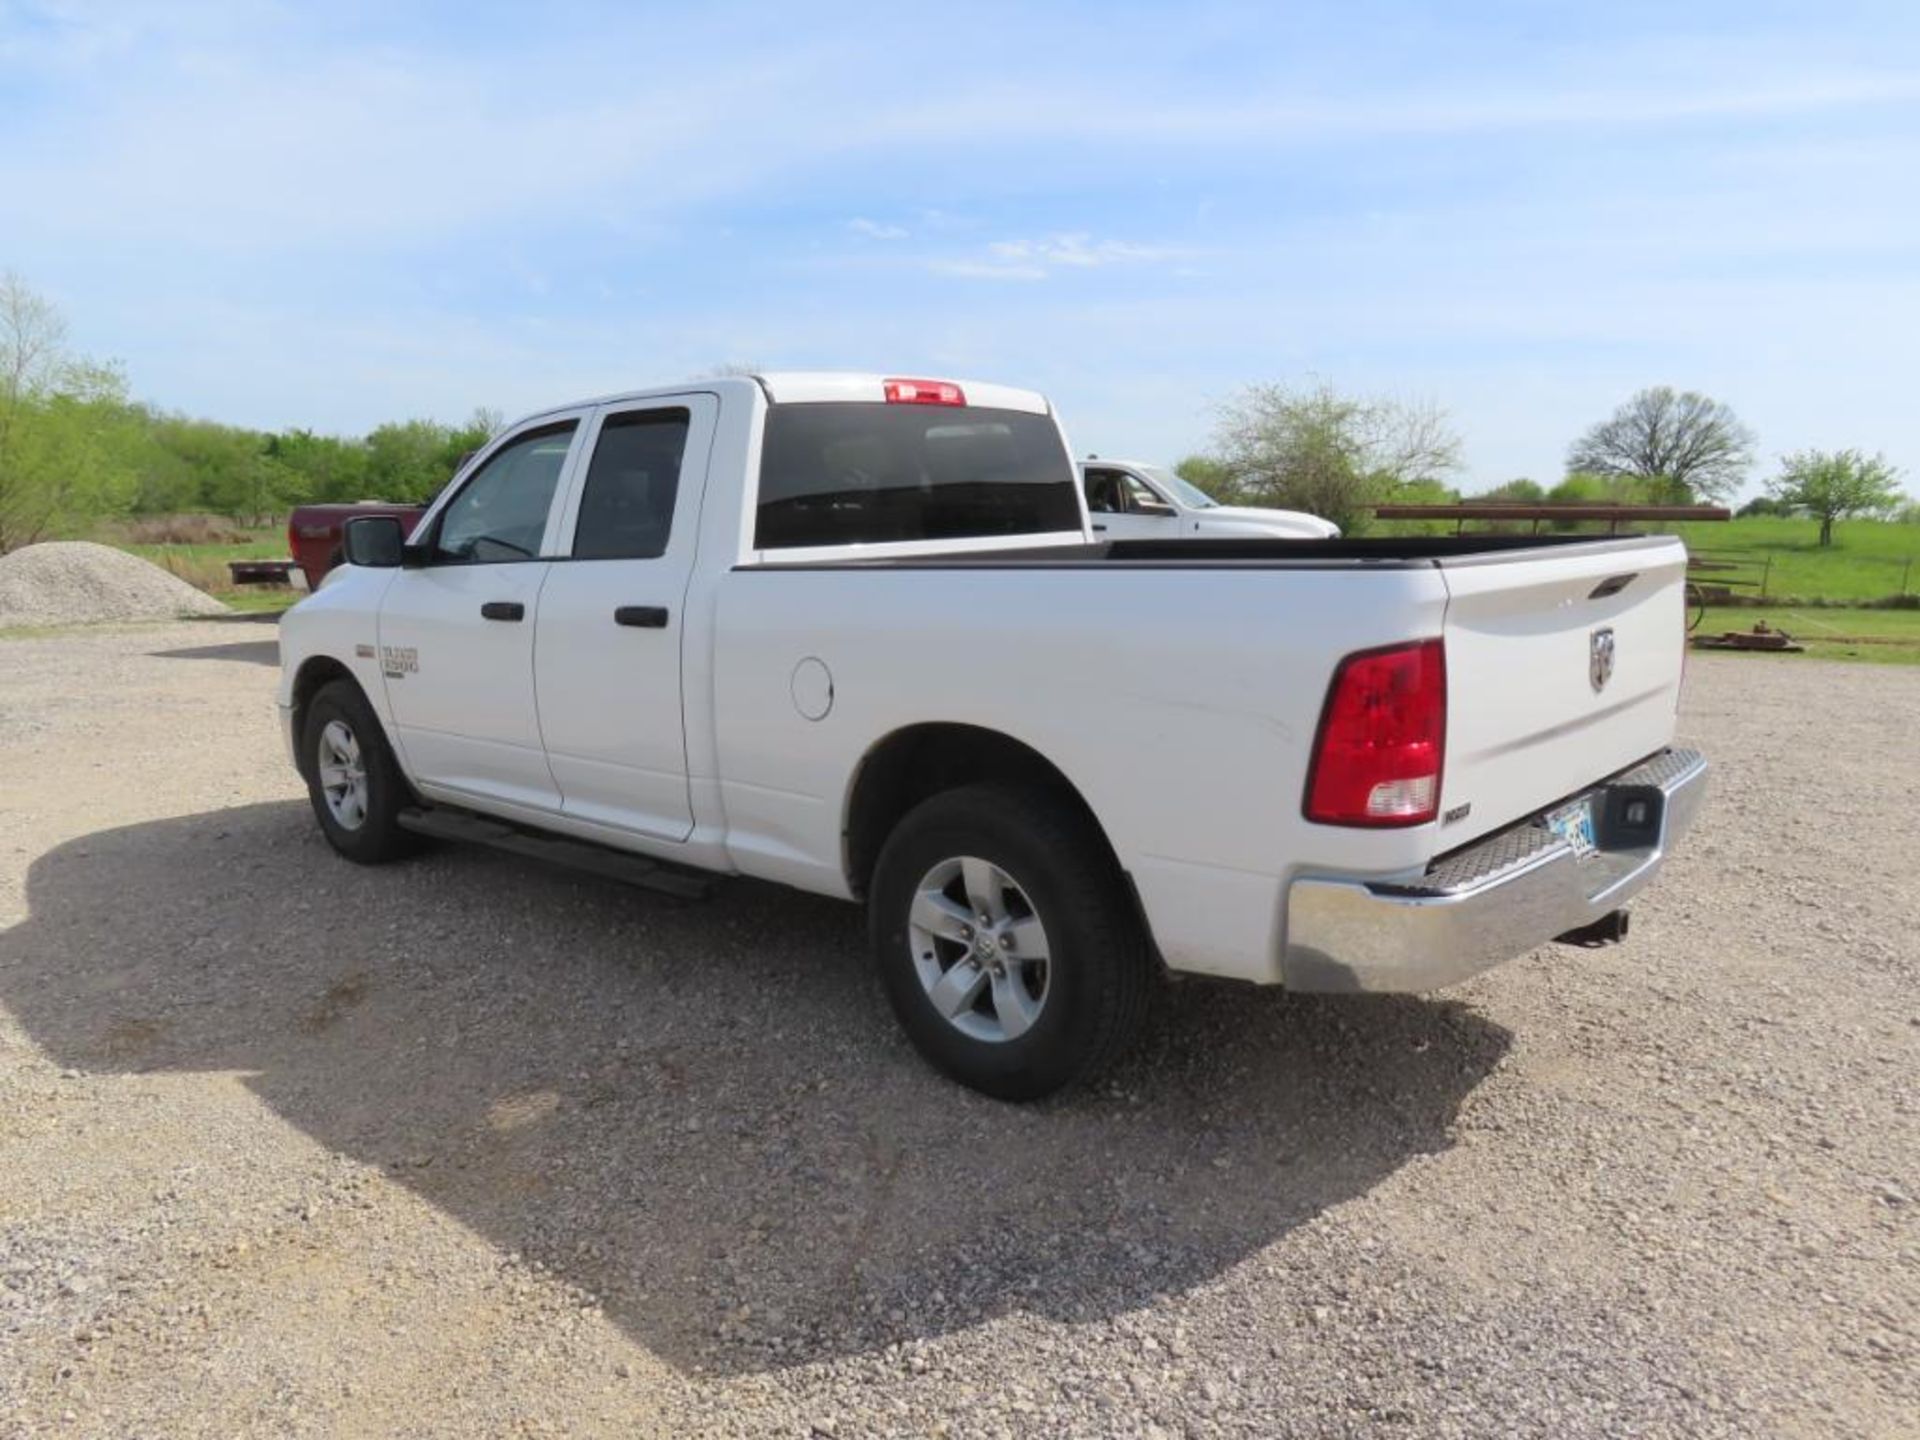 2019 RAM 1500 CLASSIC EXT. CAB PICKUP, VIN# 1C6RR6FT6KS723075, APPROX. 24,400 MILES, STD. BED, SPRAY - Image 3 of 9